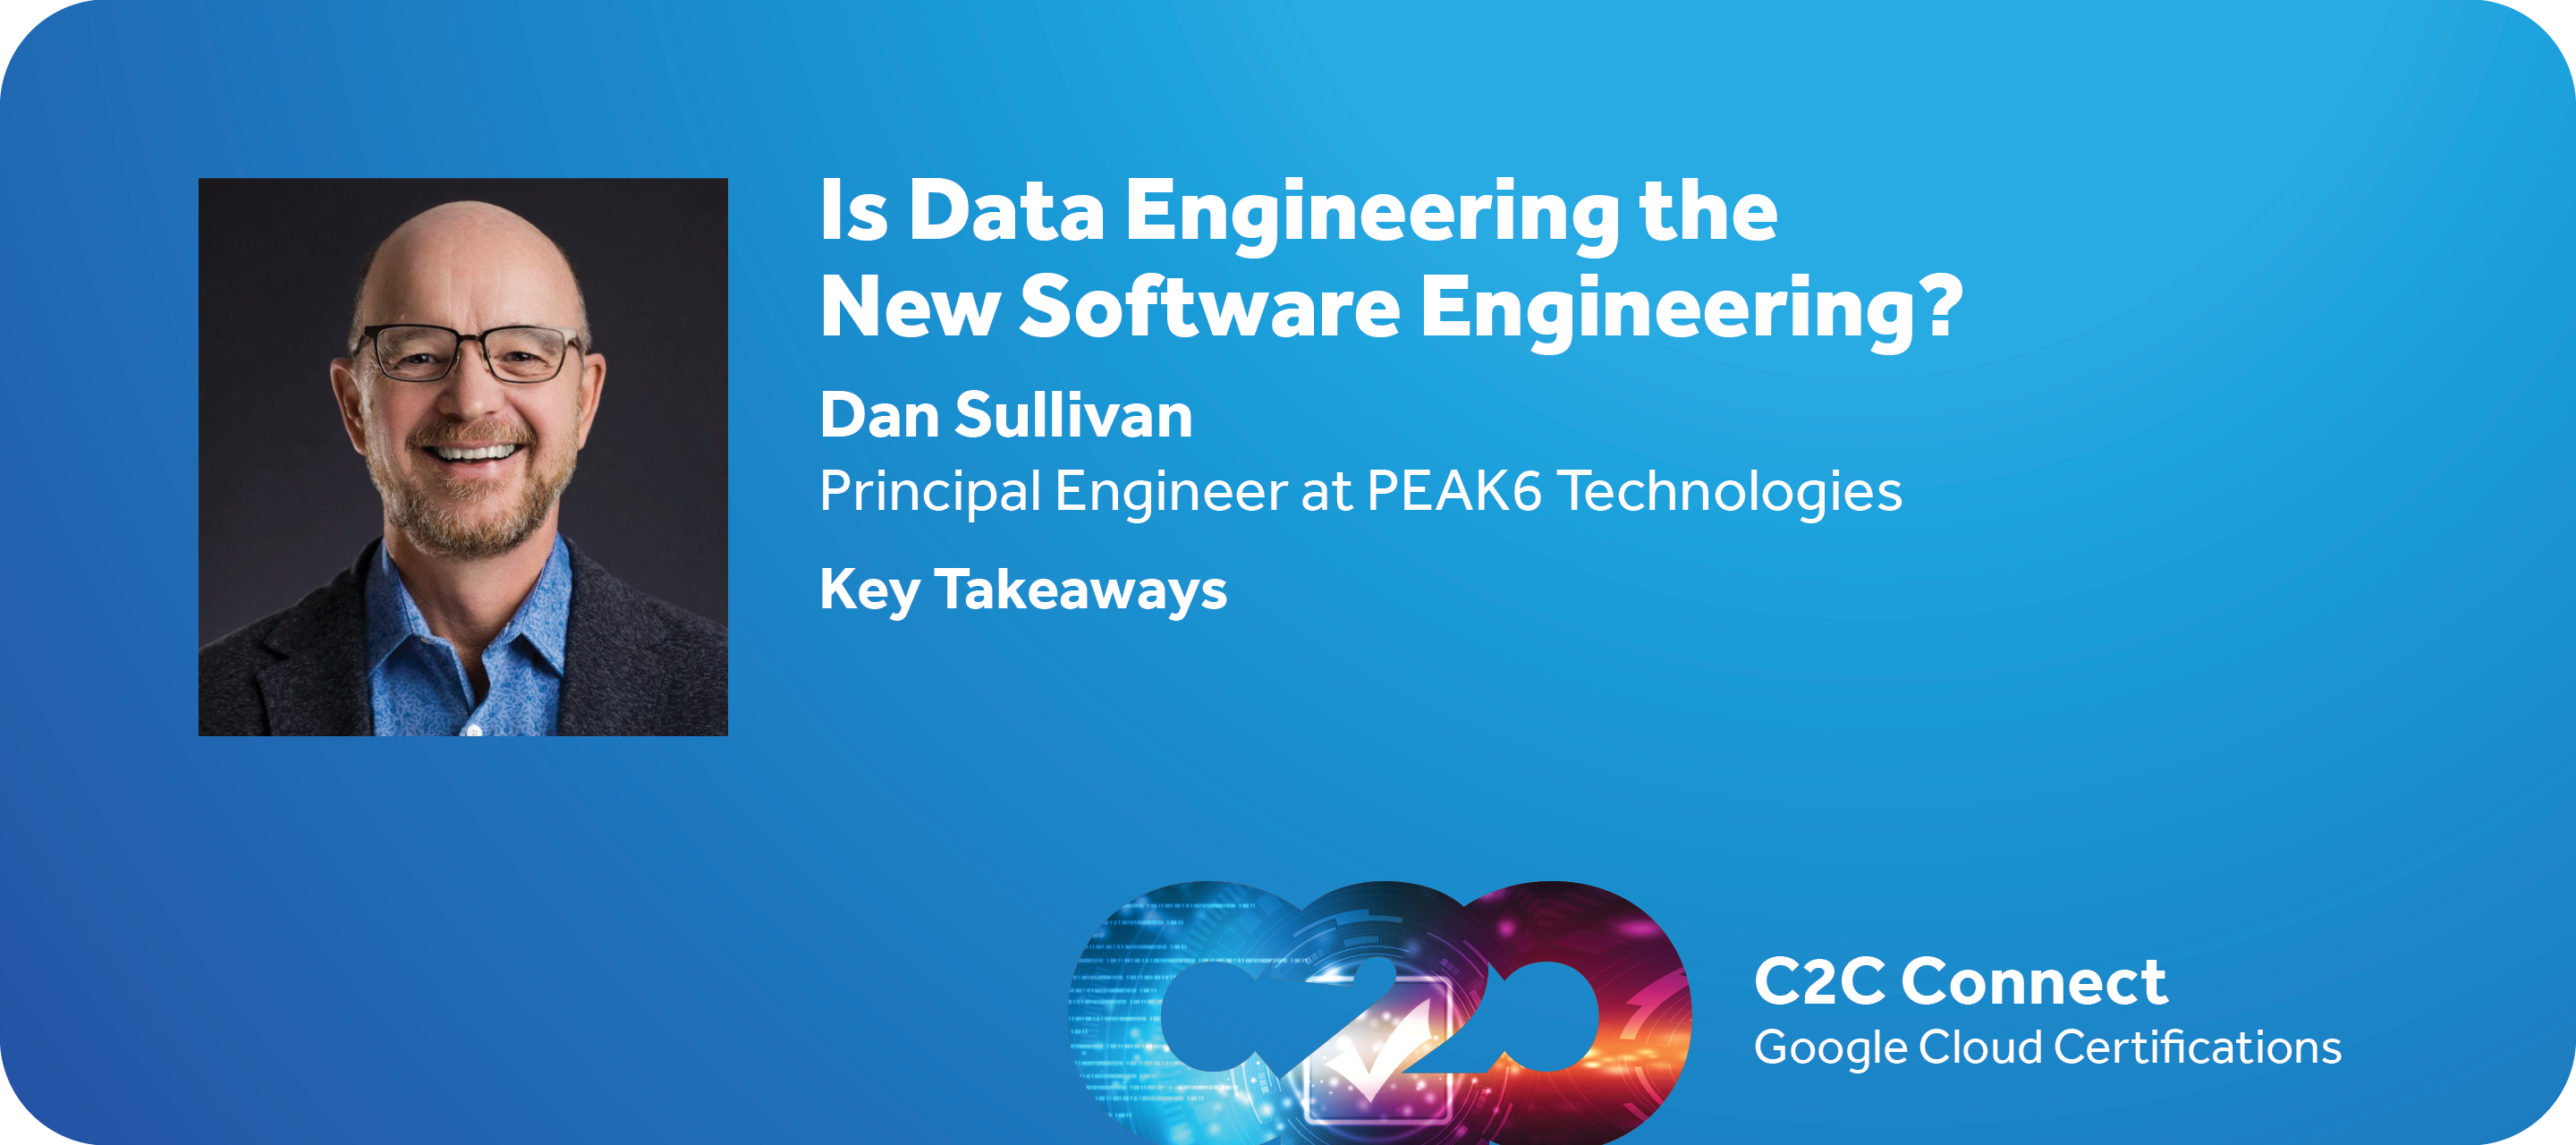 Is Data Engineering the New Software Engineering? (full video)